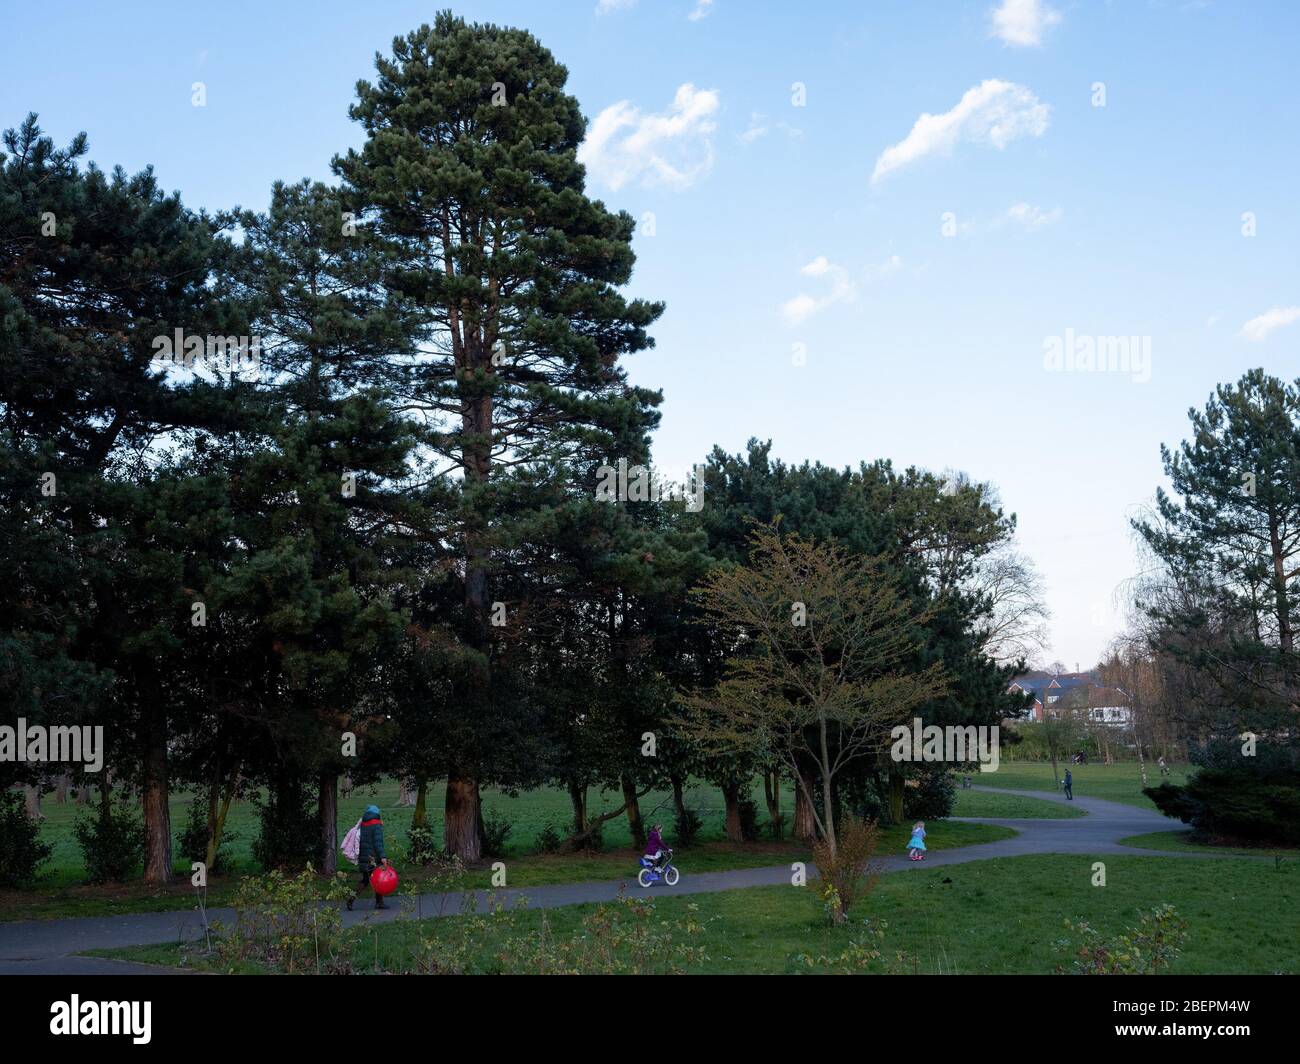 Two children of 2 and 4 years old in a London park on a scooter and bicycle with their mum trailing behind. Roundwood Park, Harlesden, London Stock Photo